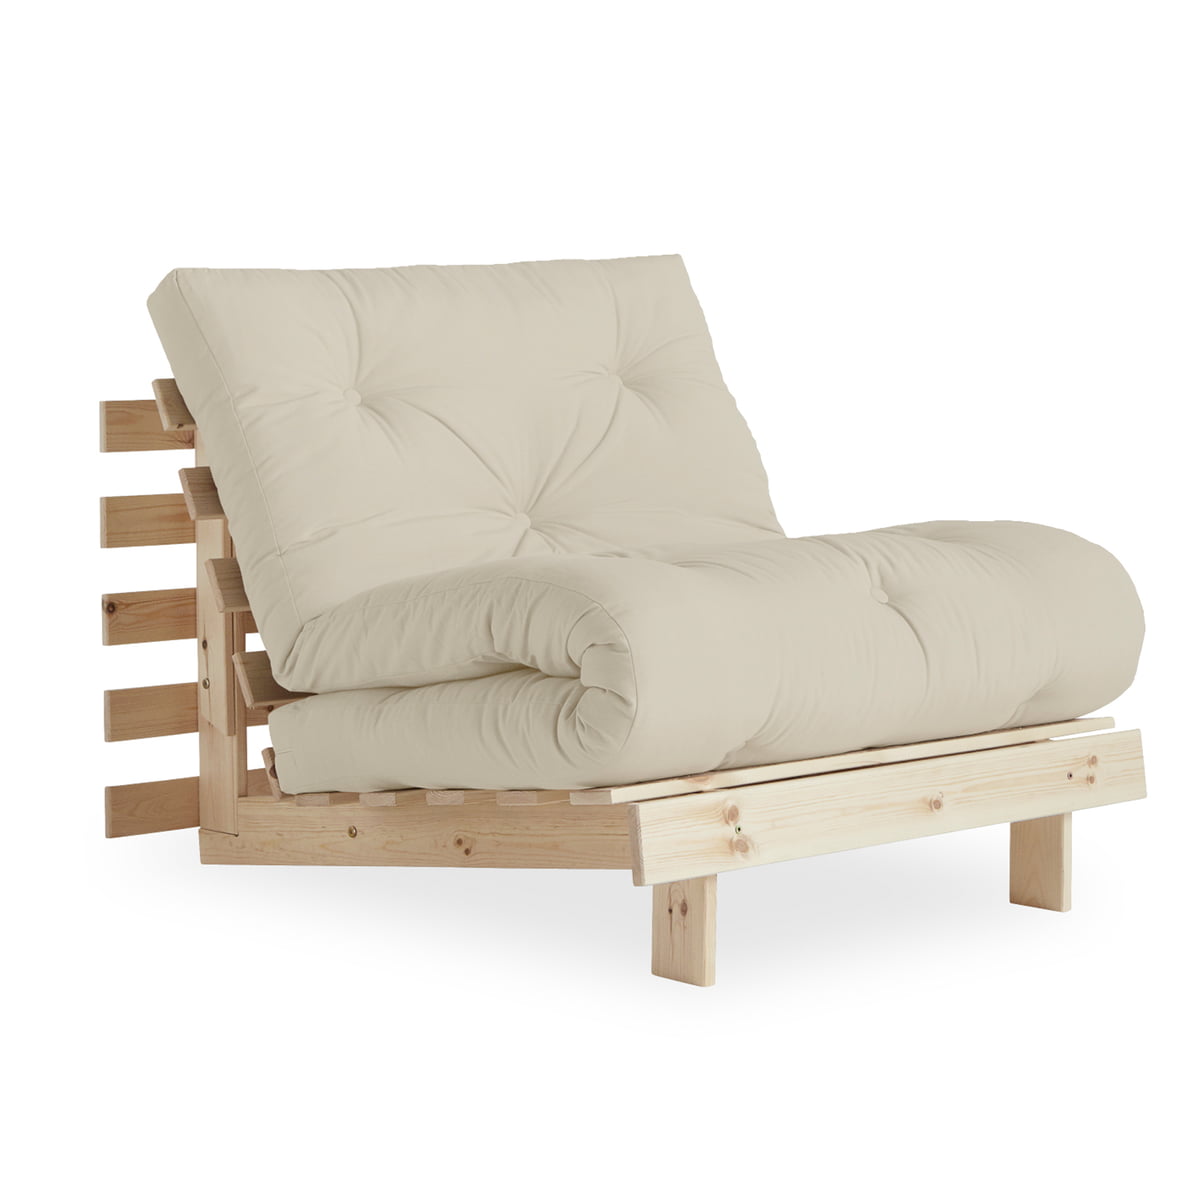 - Sleeping | Roots Connox Karup Design chair